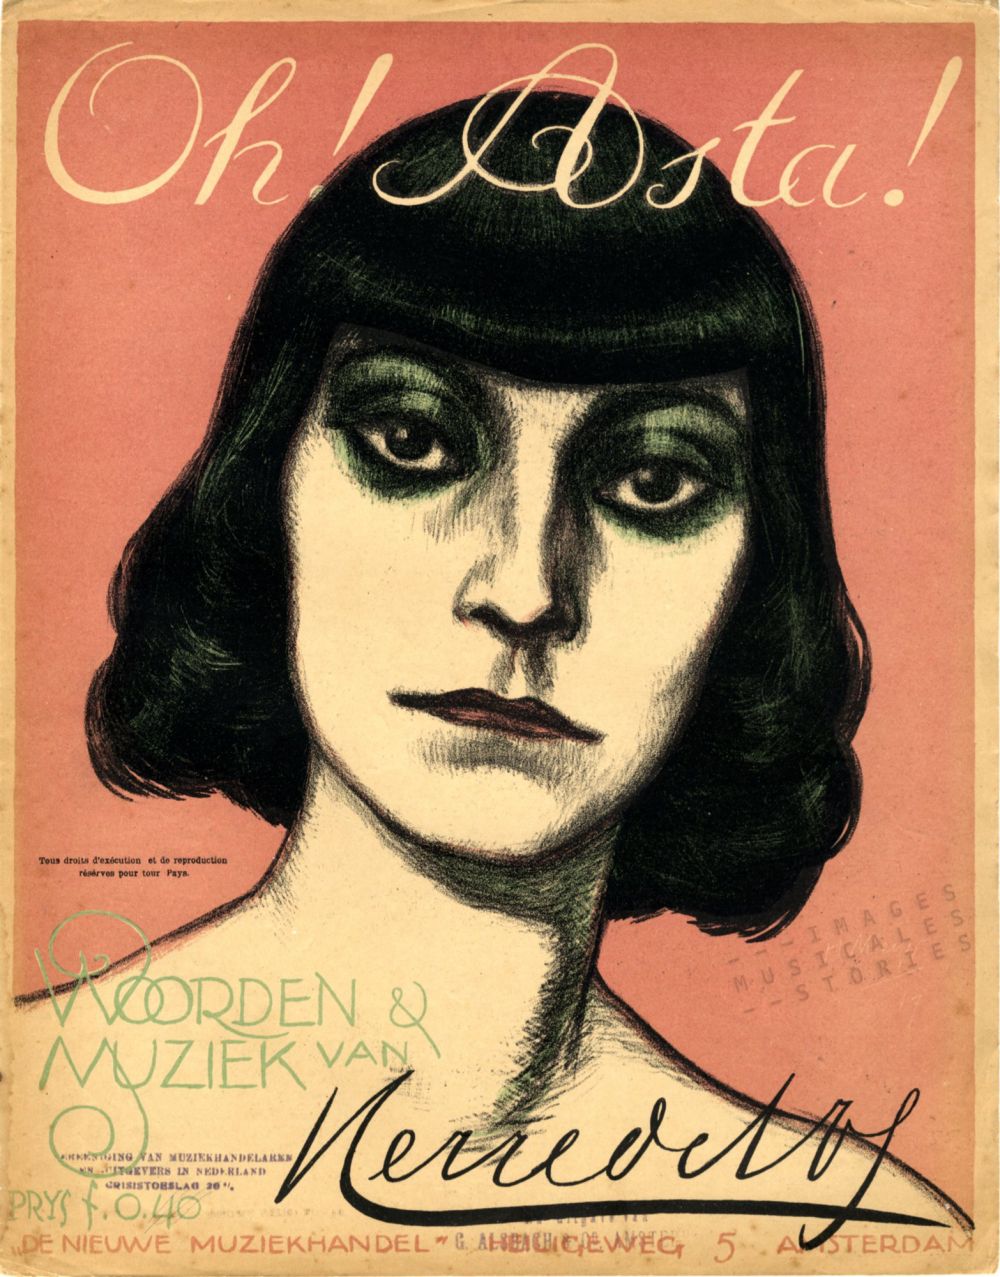 Asta Nielsen Sexy and Hottest Photos , Latest Pics